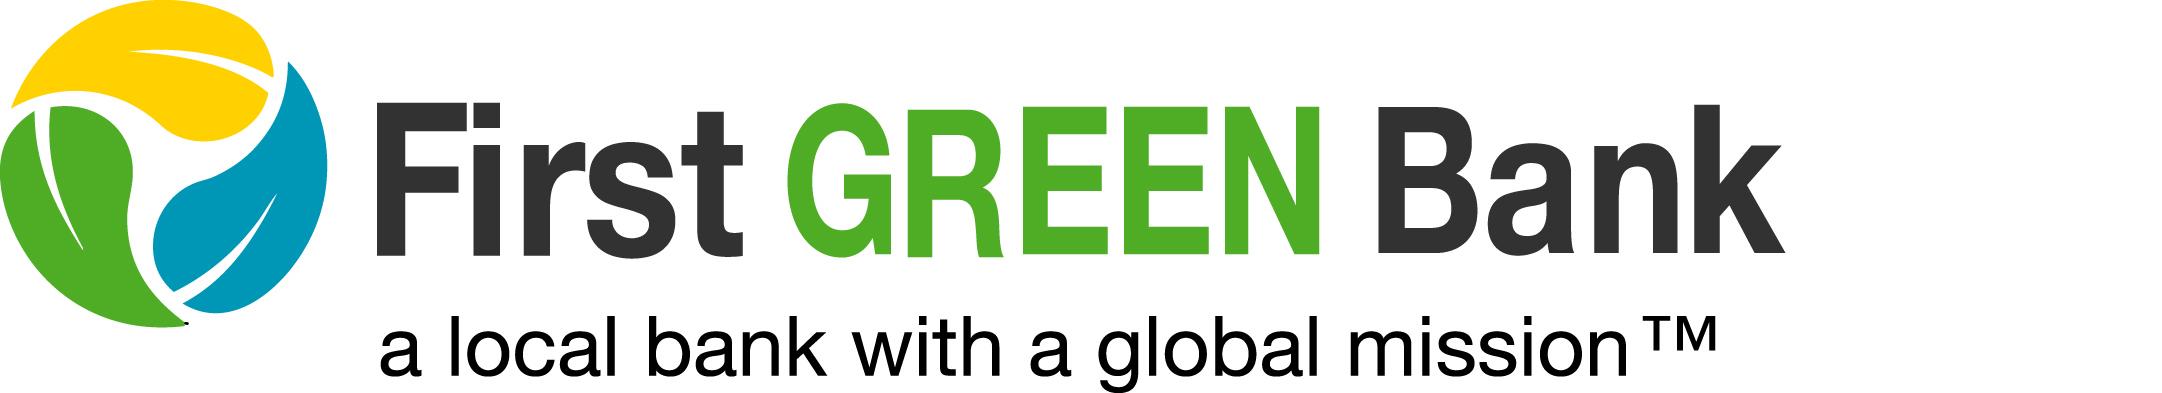 Green Bank Logo - FirstGreenBank-NEW-pos-stat_color-June-13-2011 - IDEAS For Us